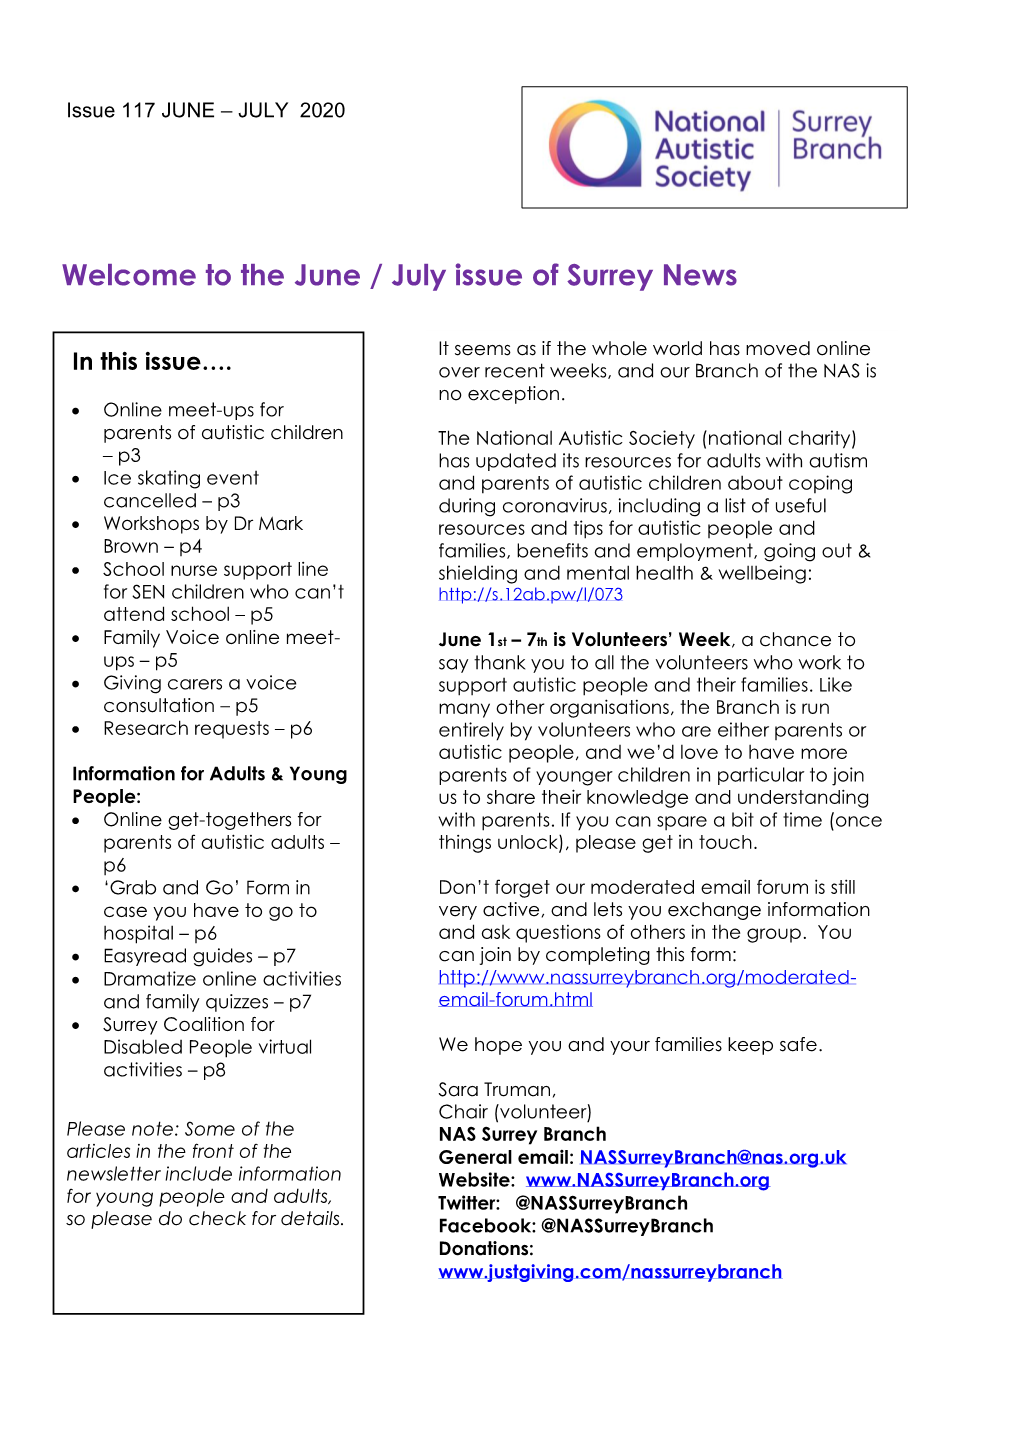 Welcome to the June / July Issue of Surrey News